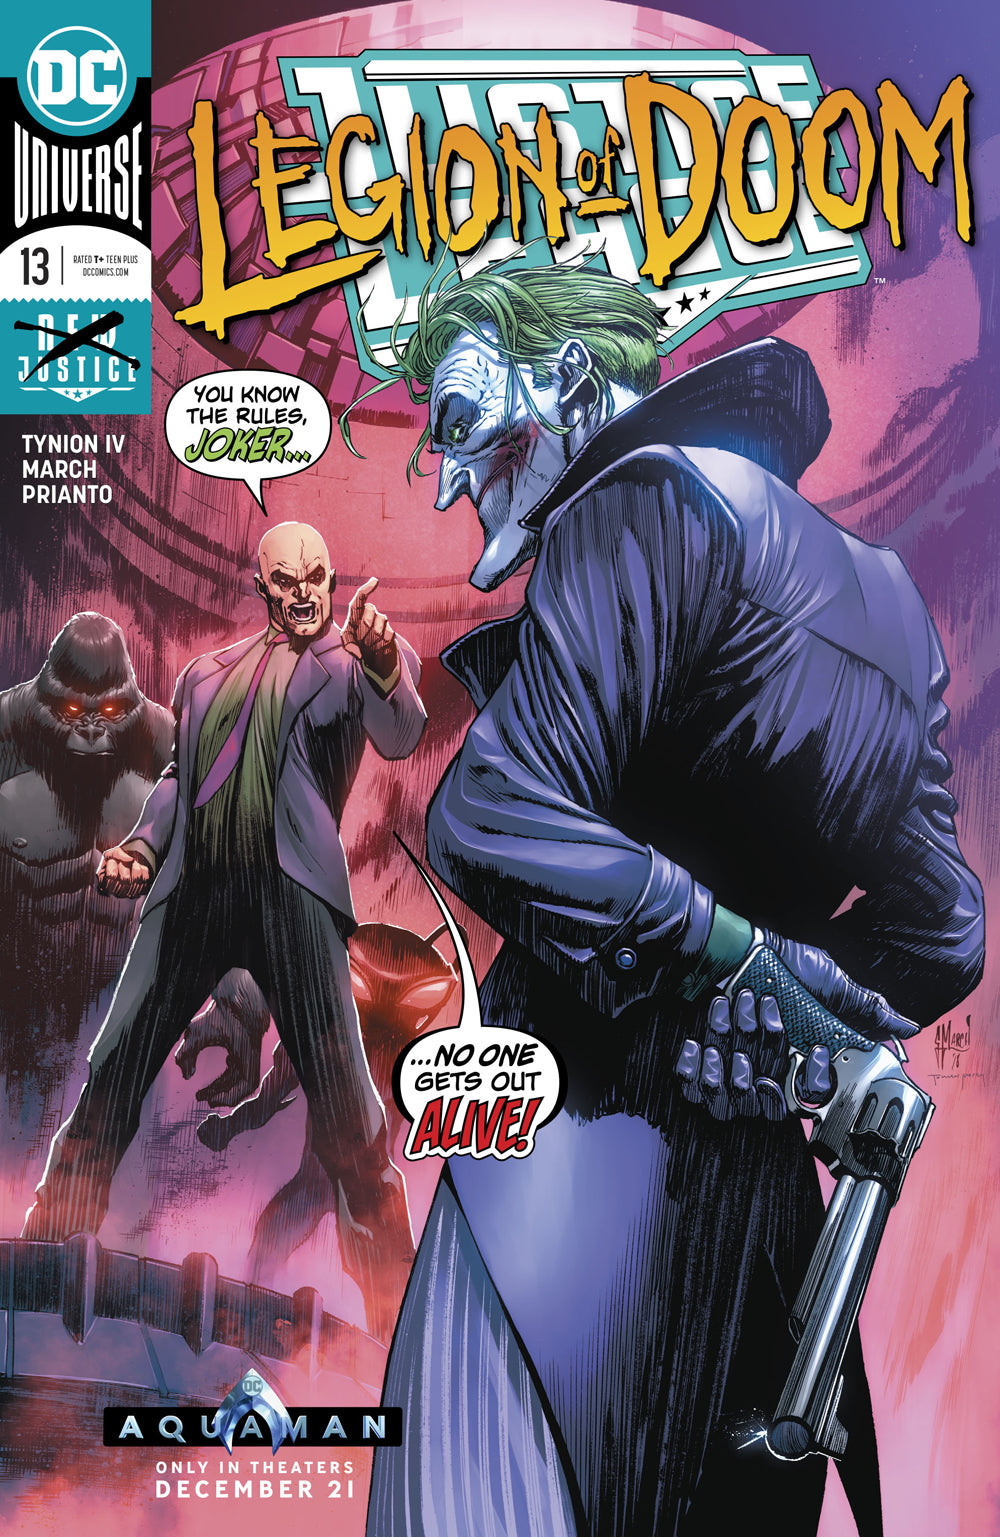 JUSTICE LEAGUE #13 | Game Master's Emporium (The New GME)